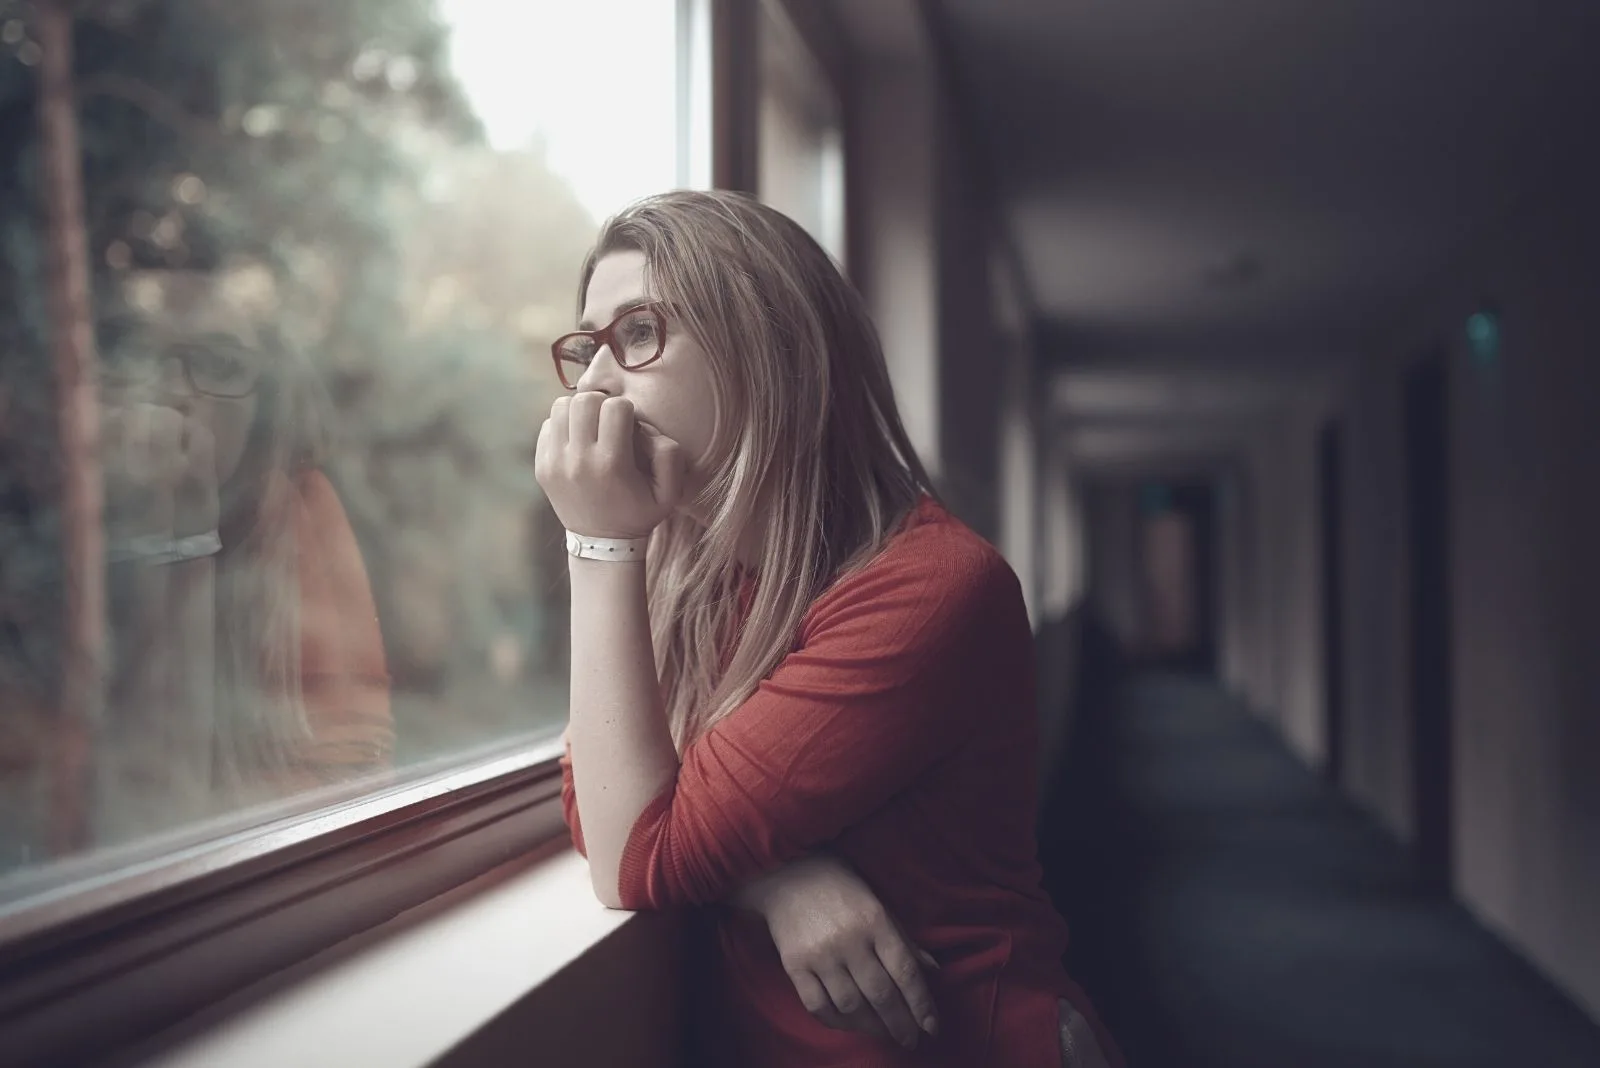 woman deeply thinking leaning on the window sill looking outside